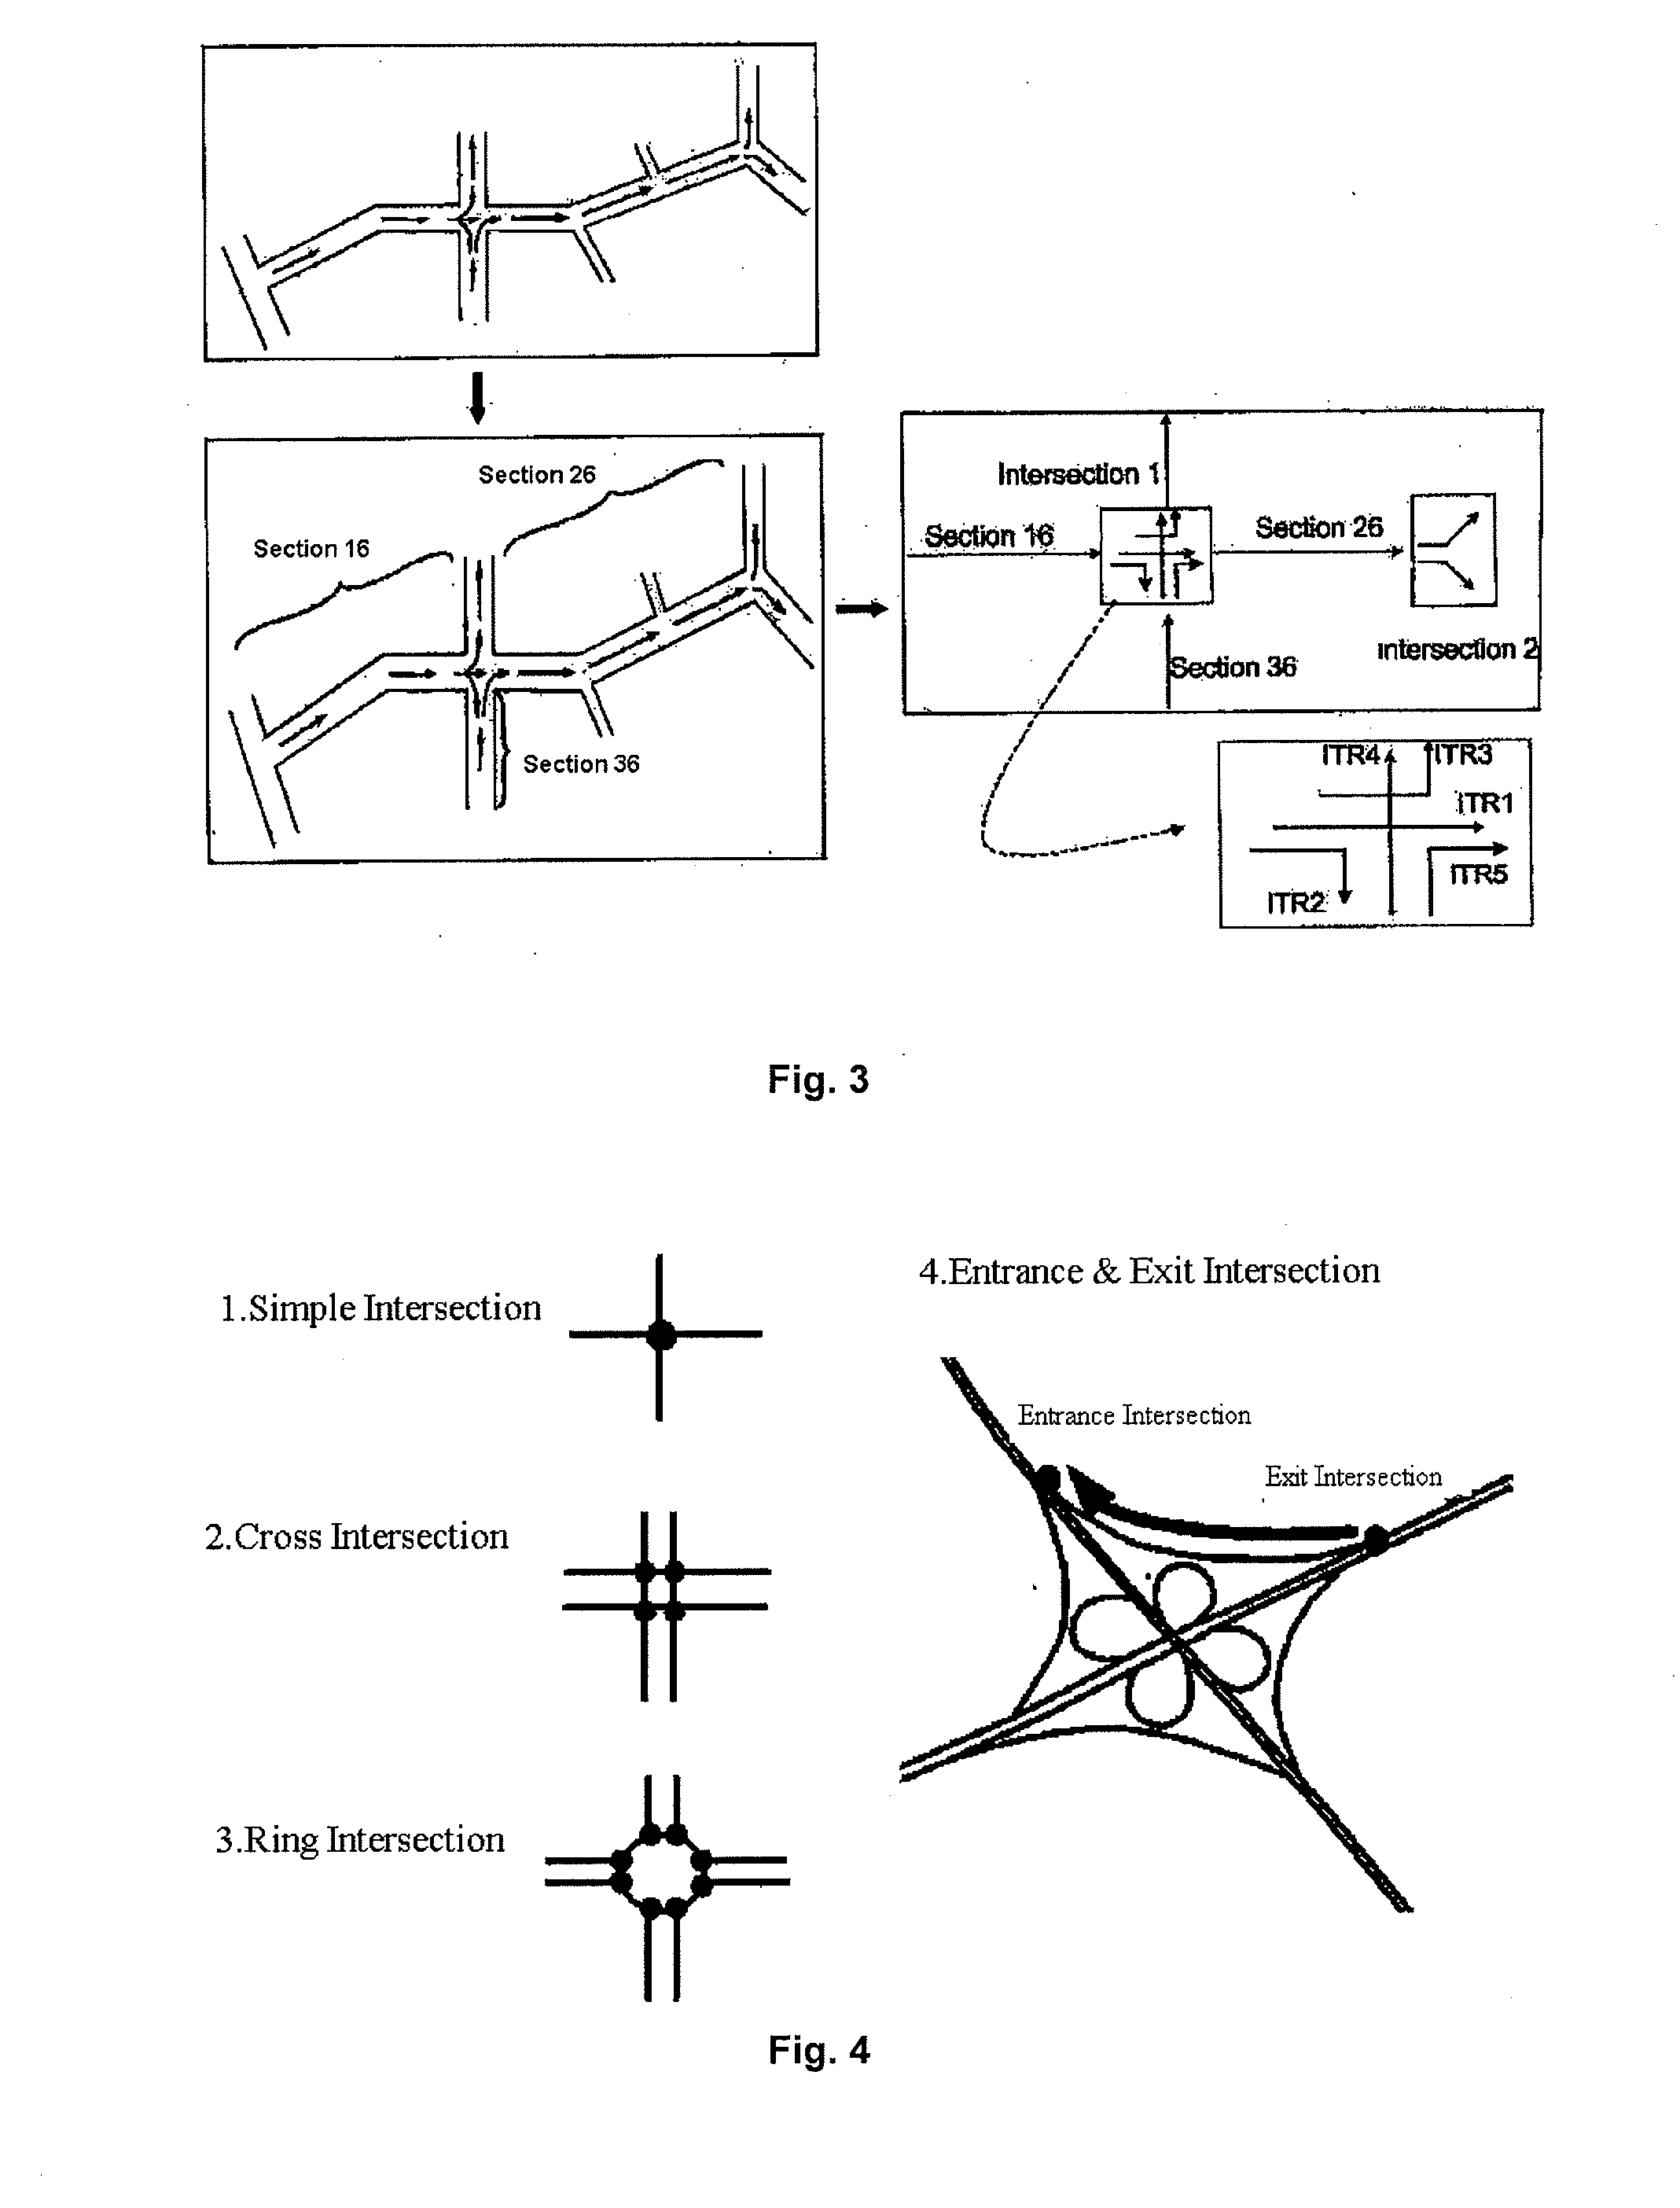 Method and apparatus for processing traffic information based on intersections and sections